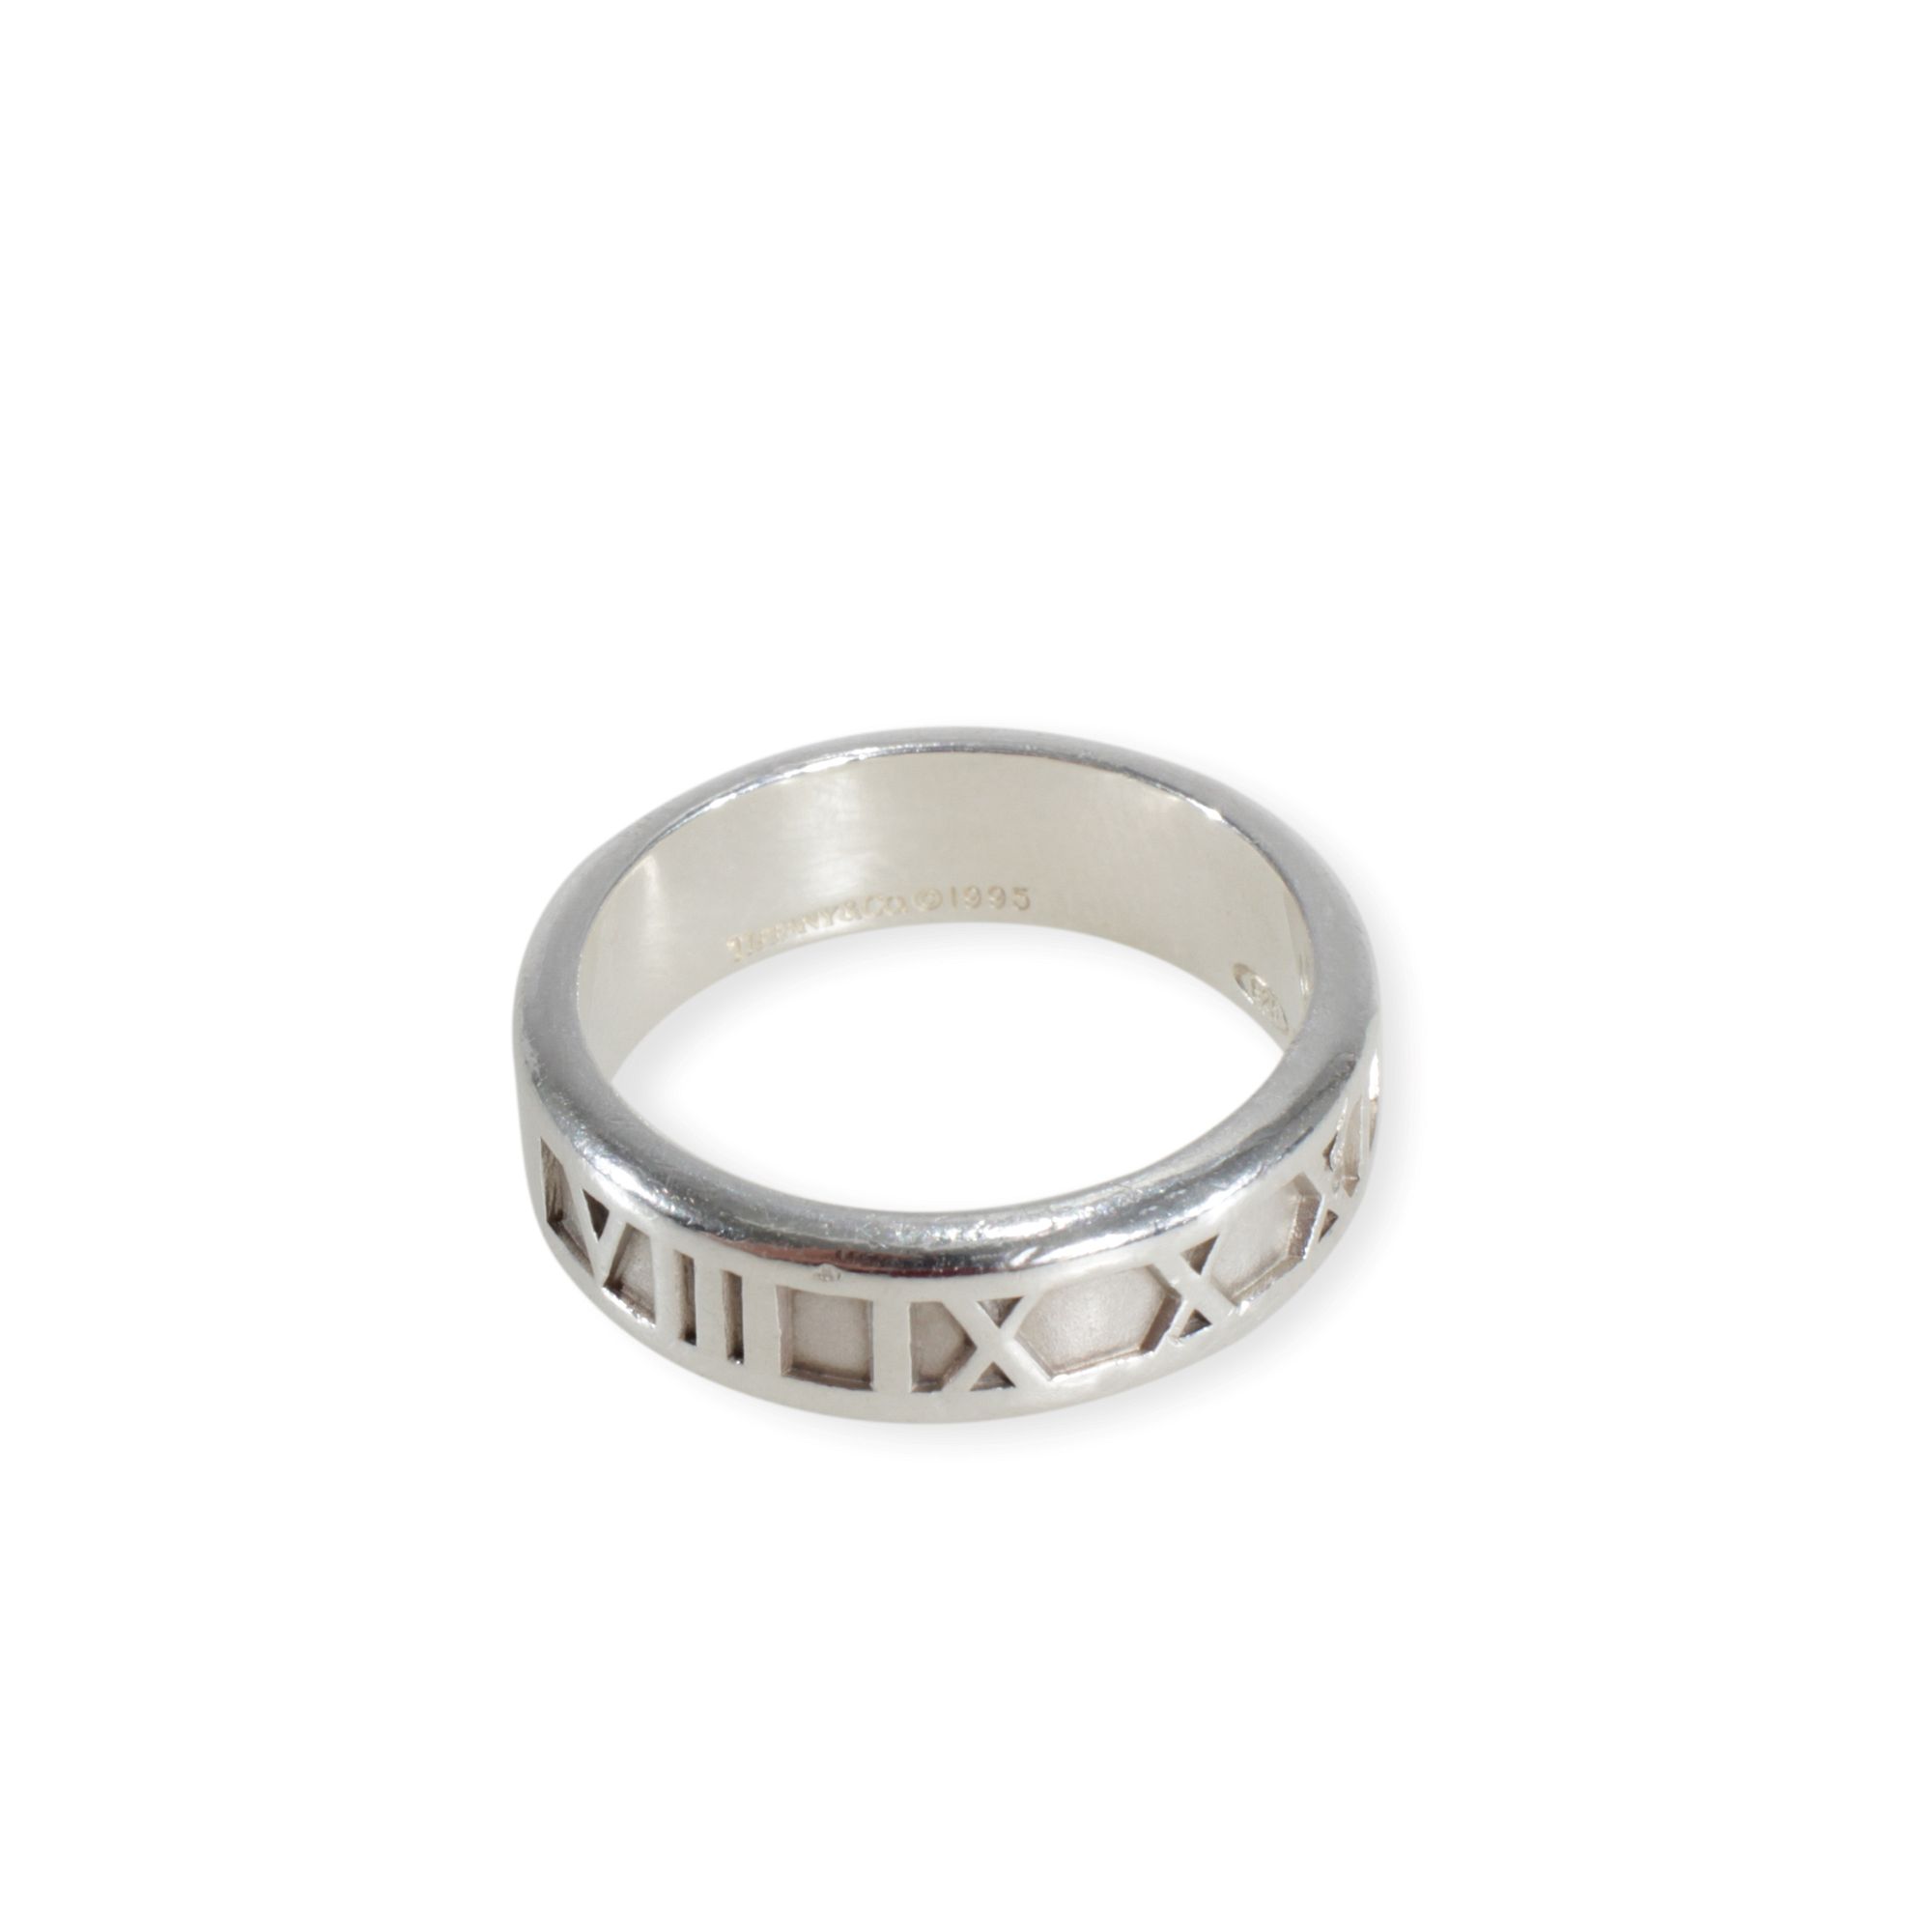 Tiffany & Co Men's Altas Ring sold at auction on 16th June | Bidsquare